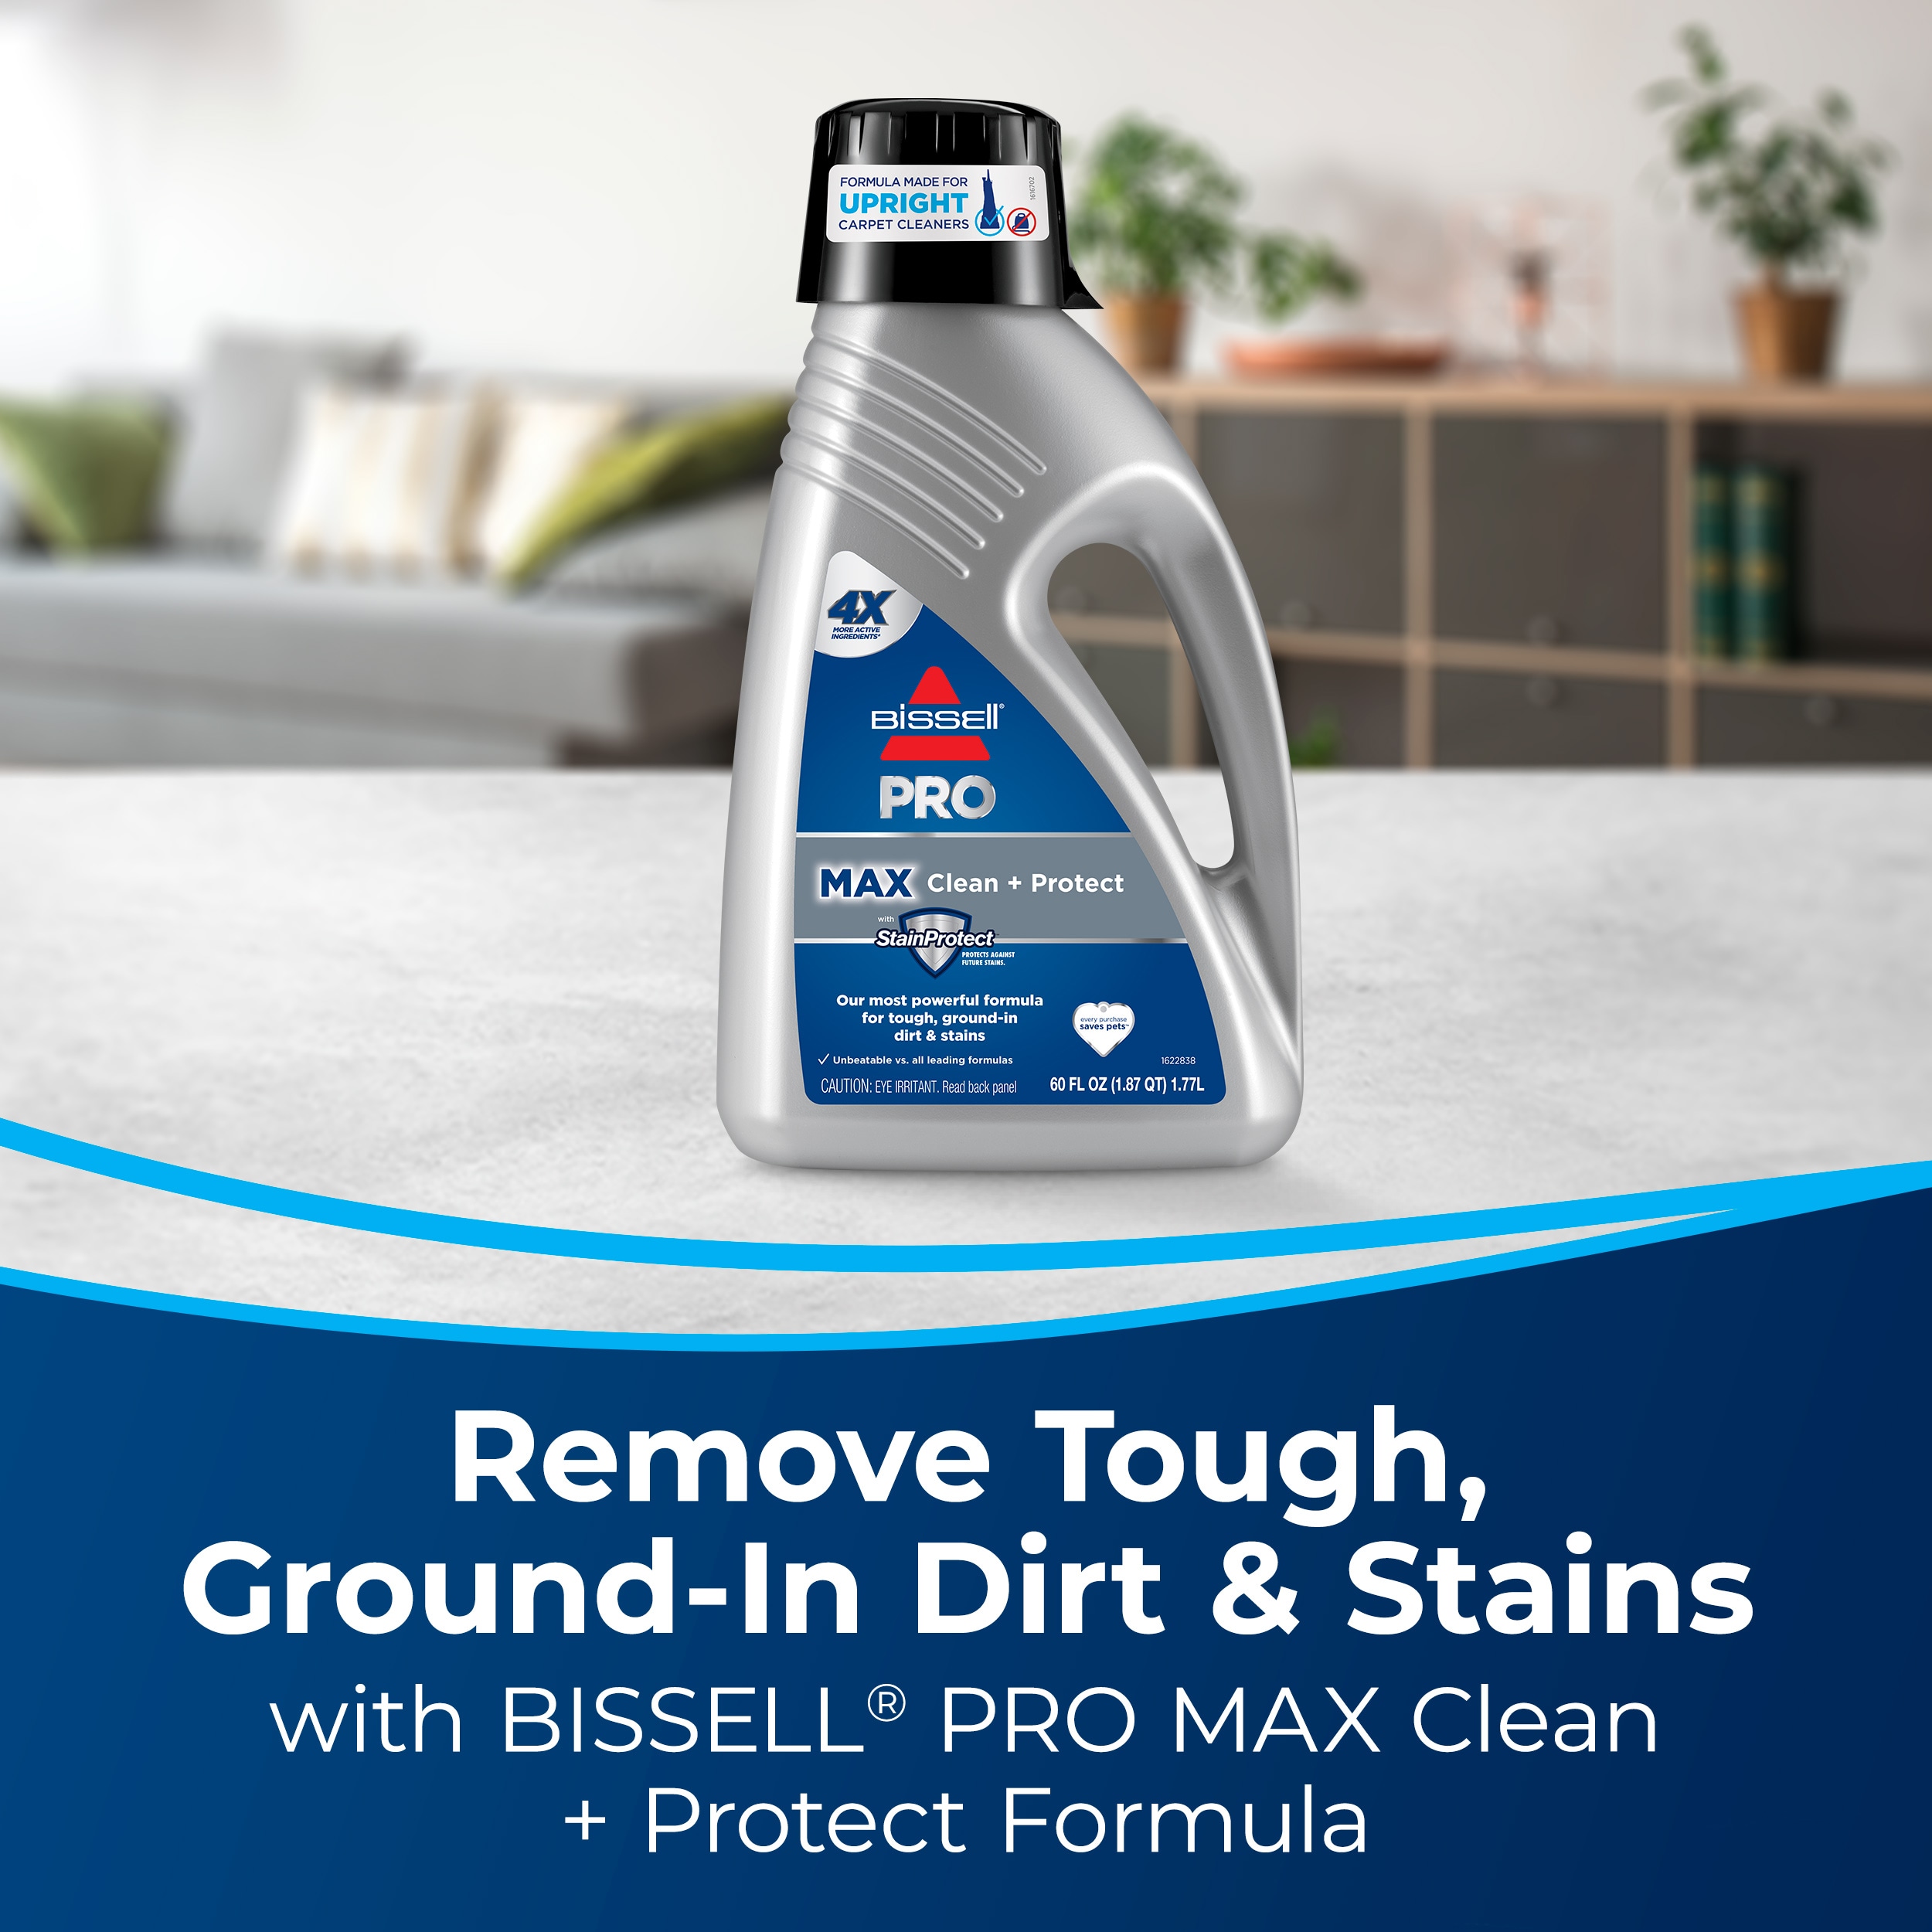 BISSELL 15484 Carpet-Cleaner - View #6